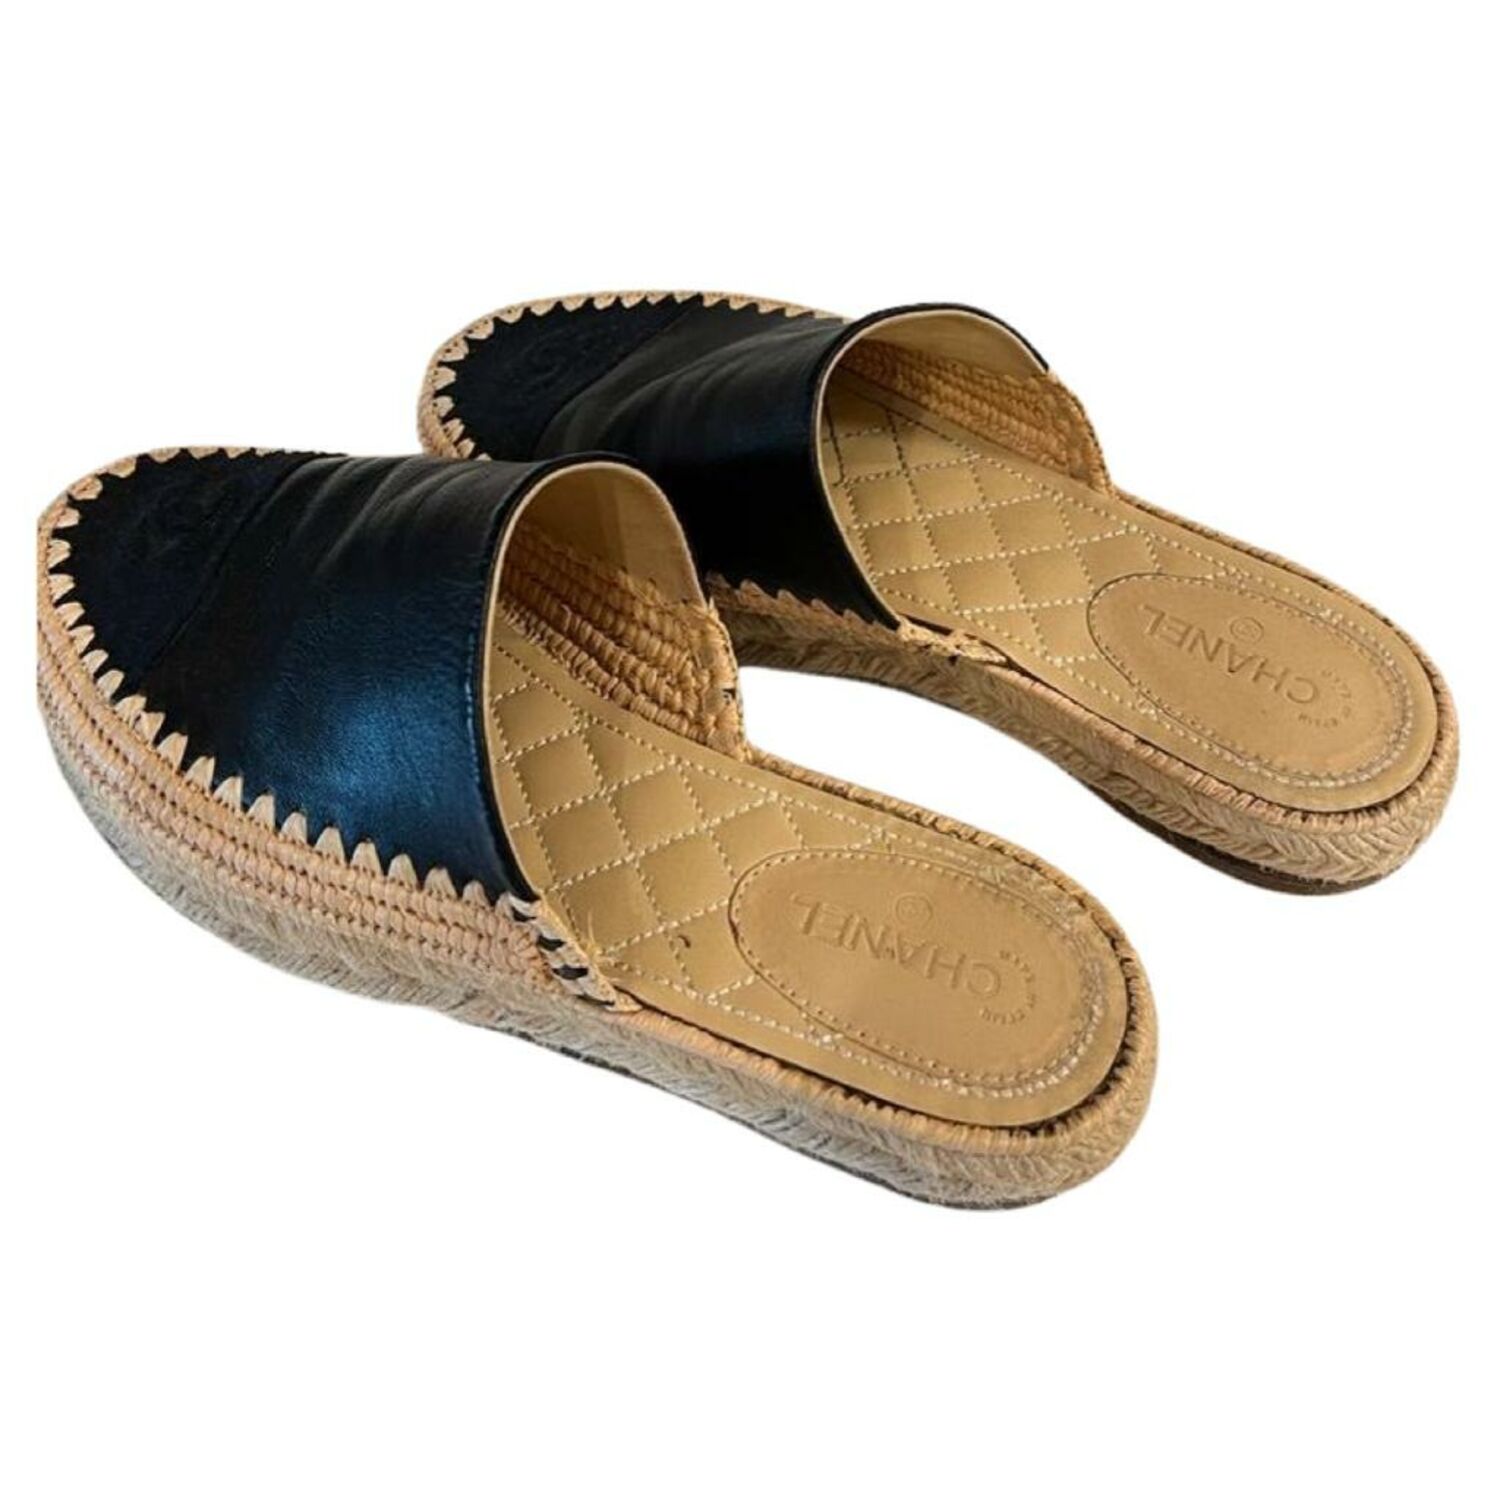 Leather slides Chanel - 38.5, buy pre-owned at 590 EUR